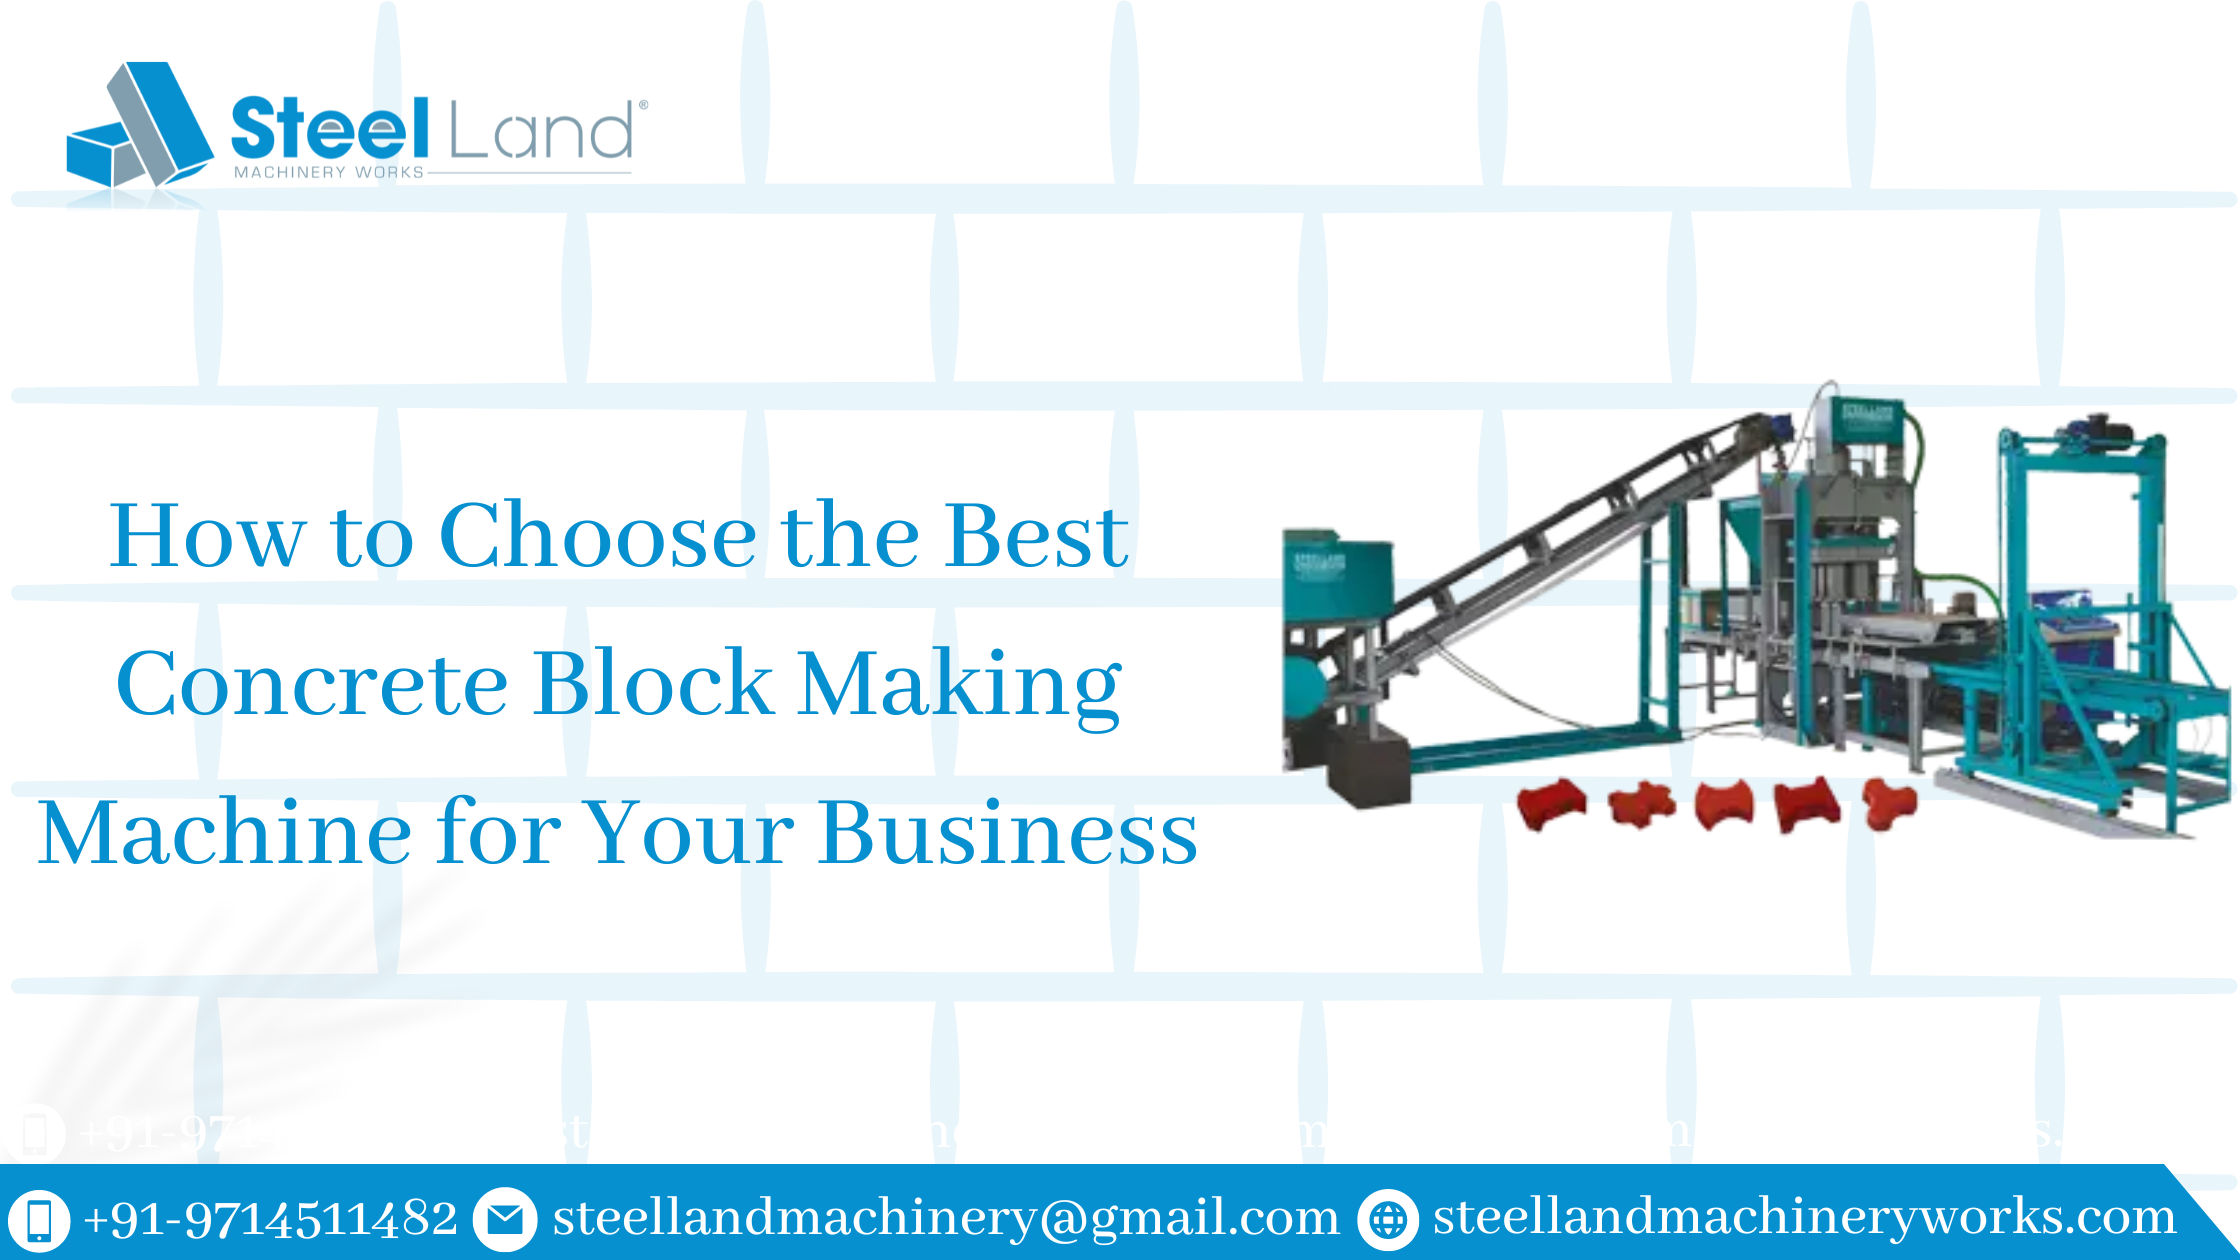 How to Choose the Best Concrete Block Making Machine for Your Business